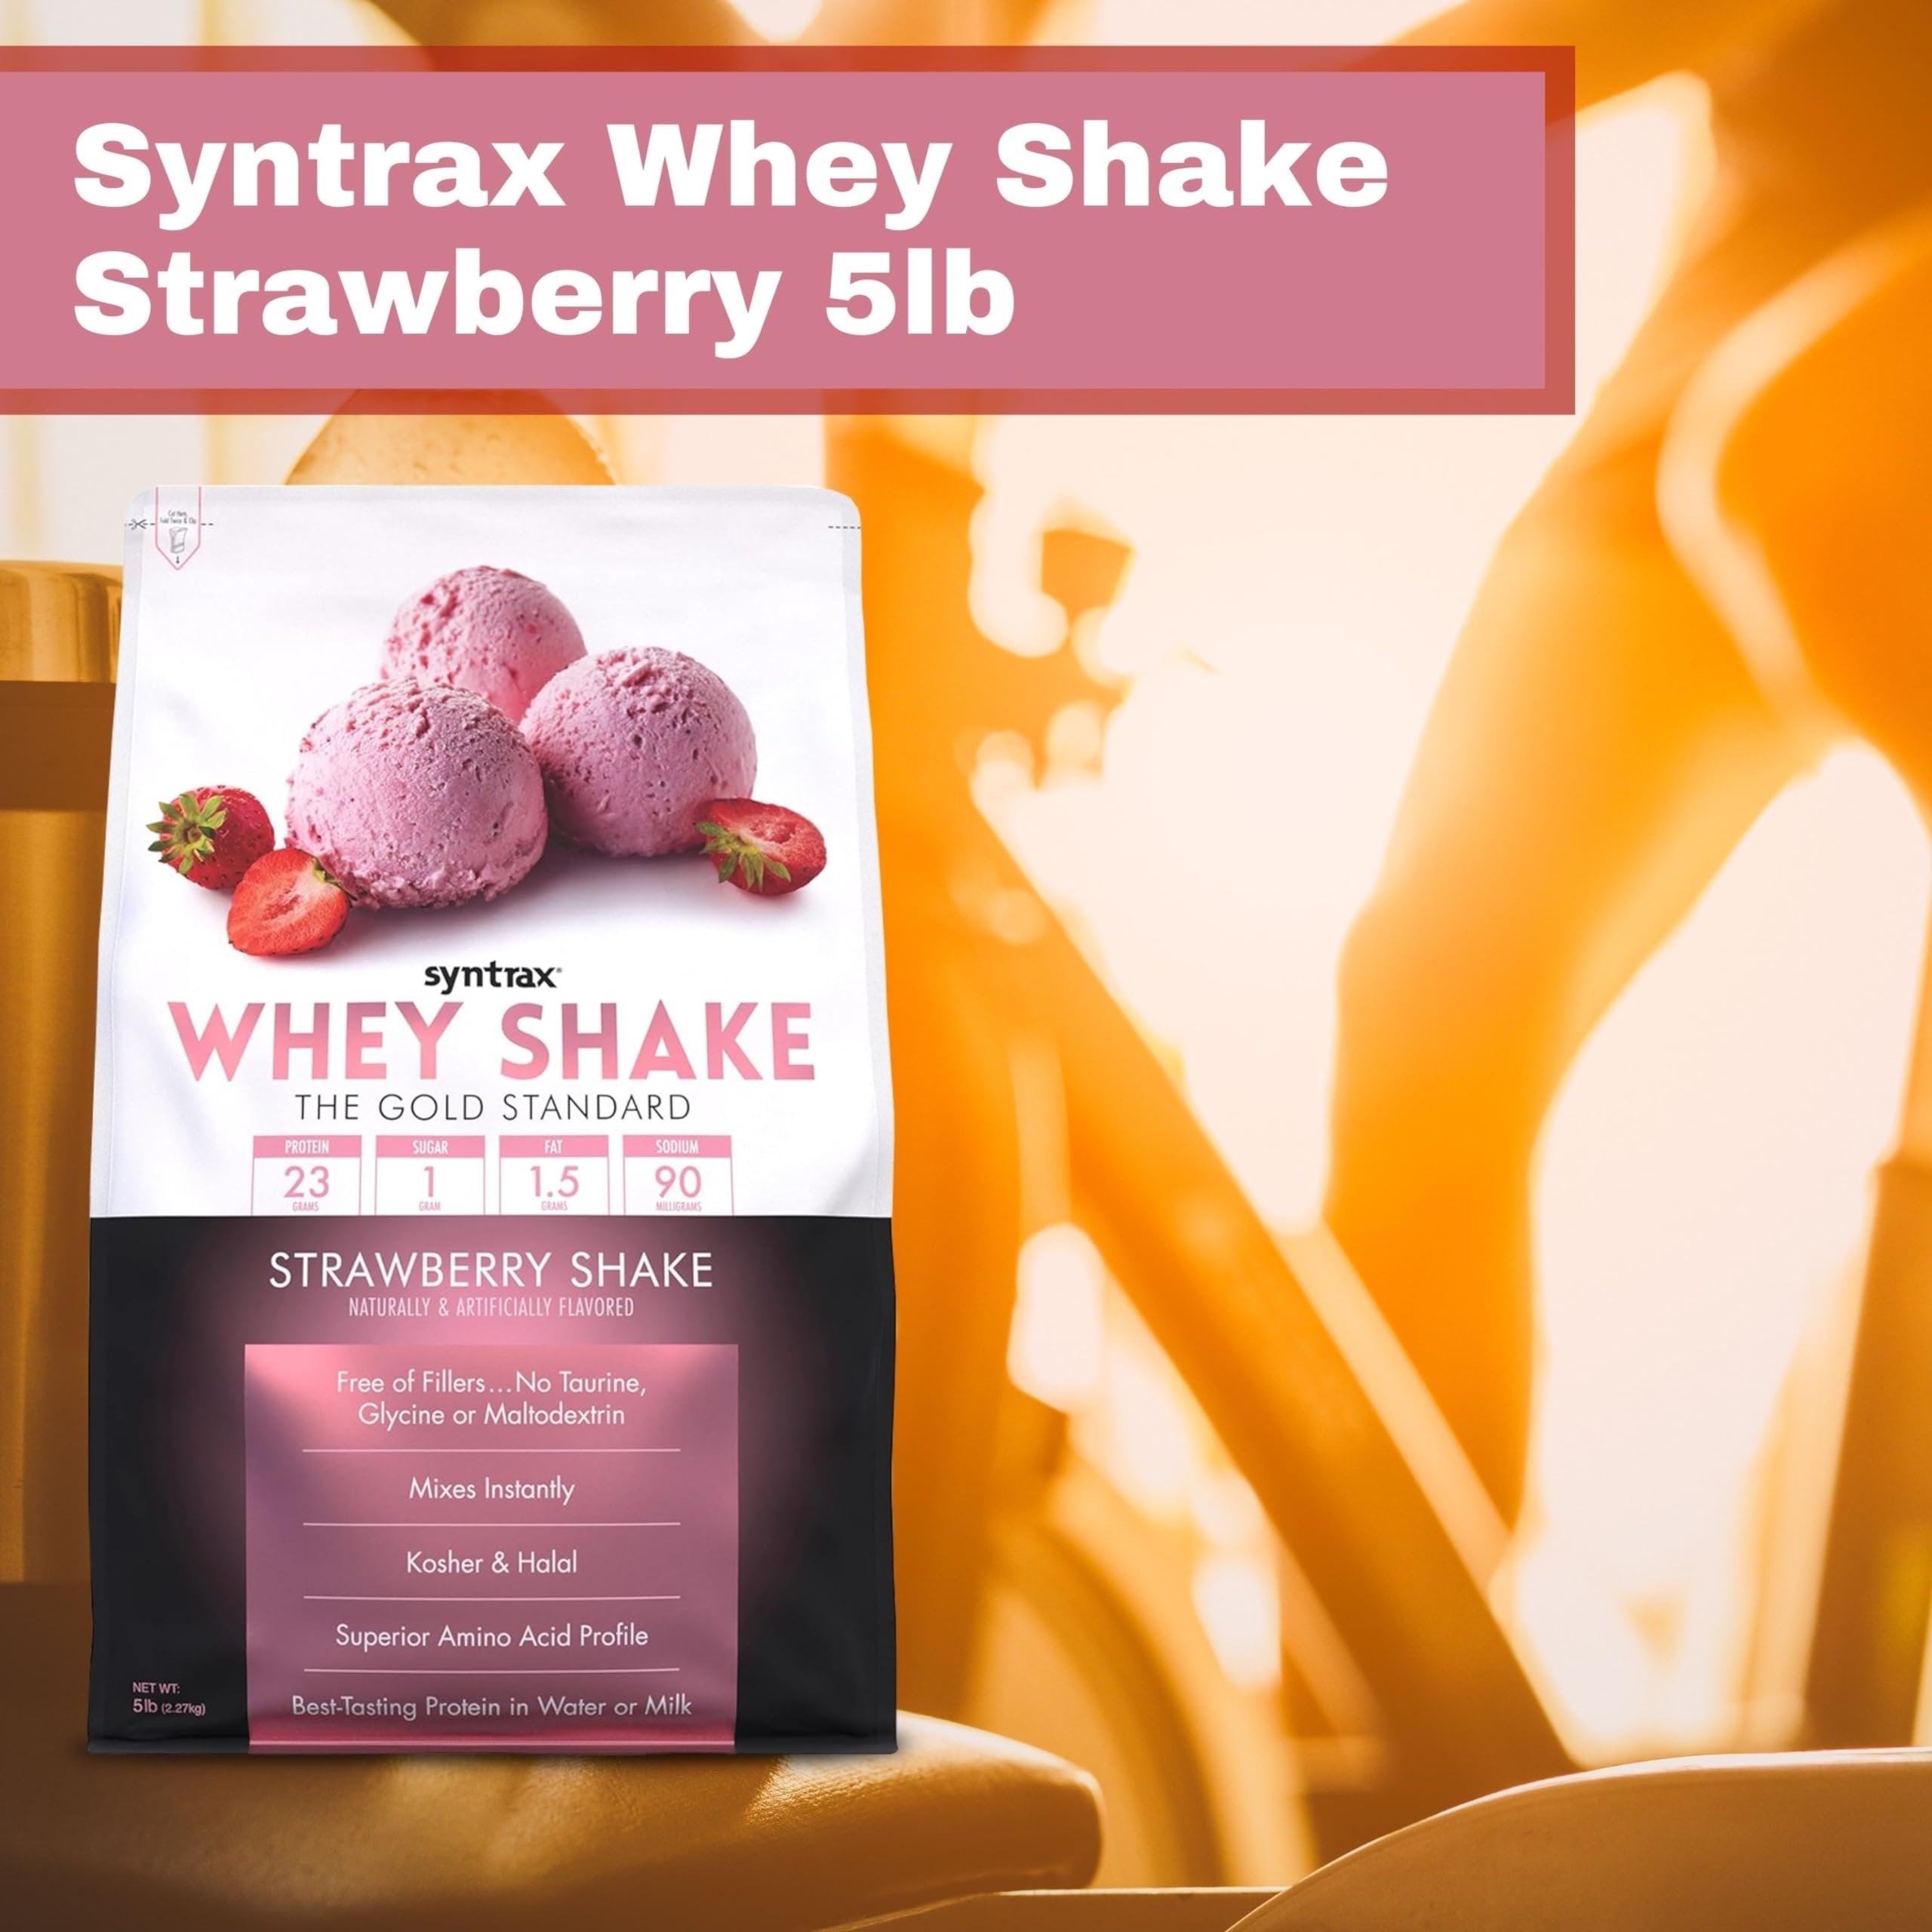 Syntrax Bundle, 2 Items Whey Shake Strawberry Shake Native Grass-Fed Wholesome Denatured Whey Protein Concentrate with Glutamine Peptides 5 Pounds with Worldwide Nutrition Keychain